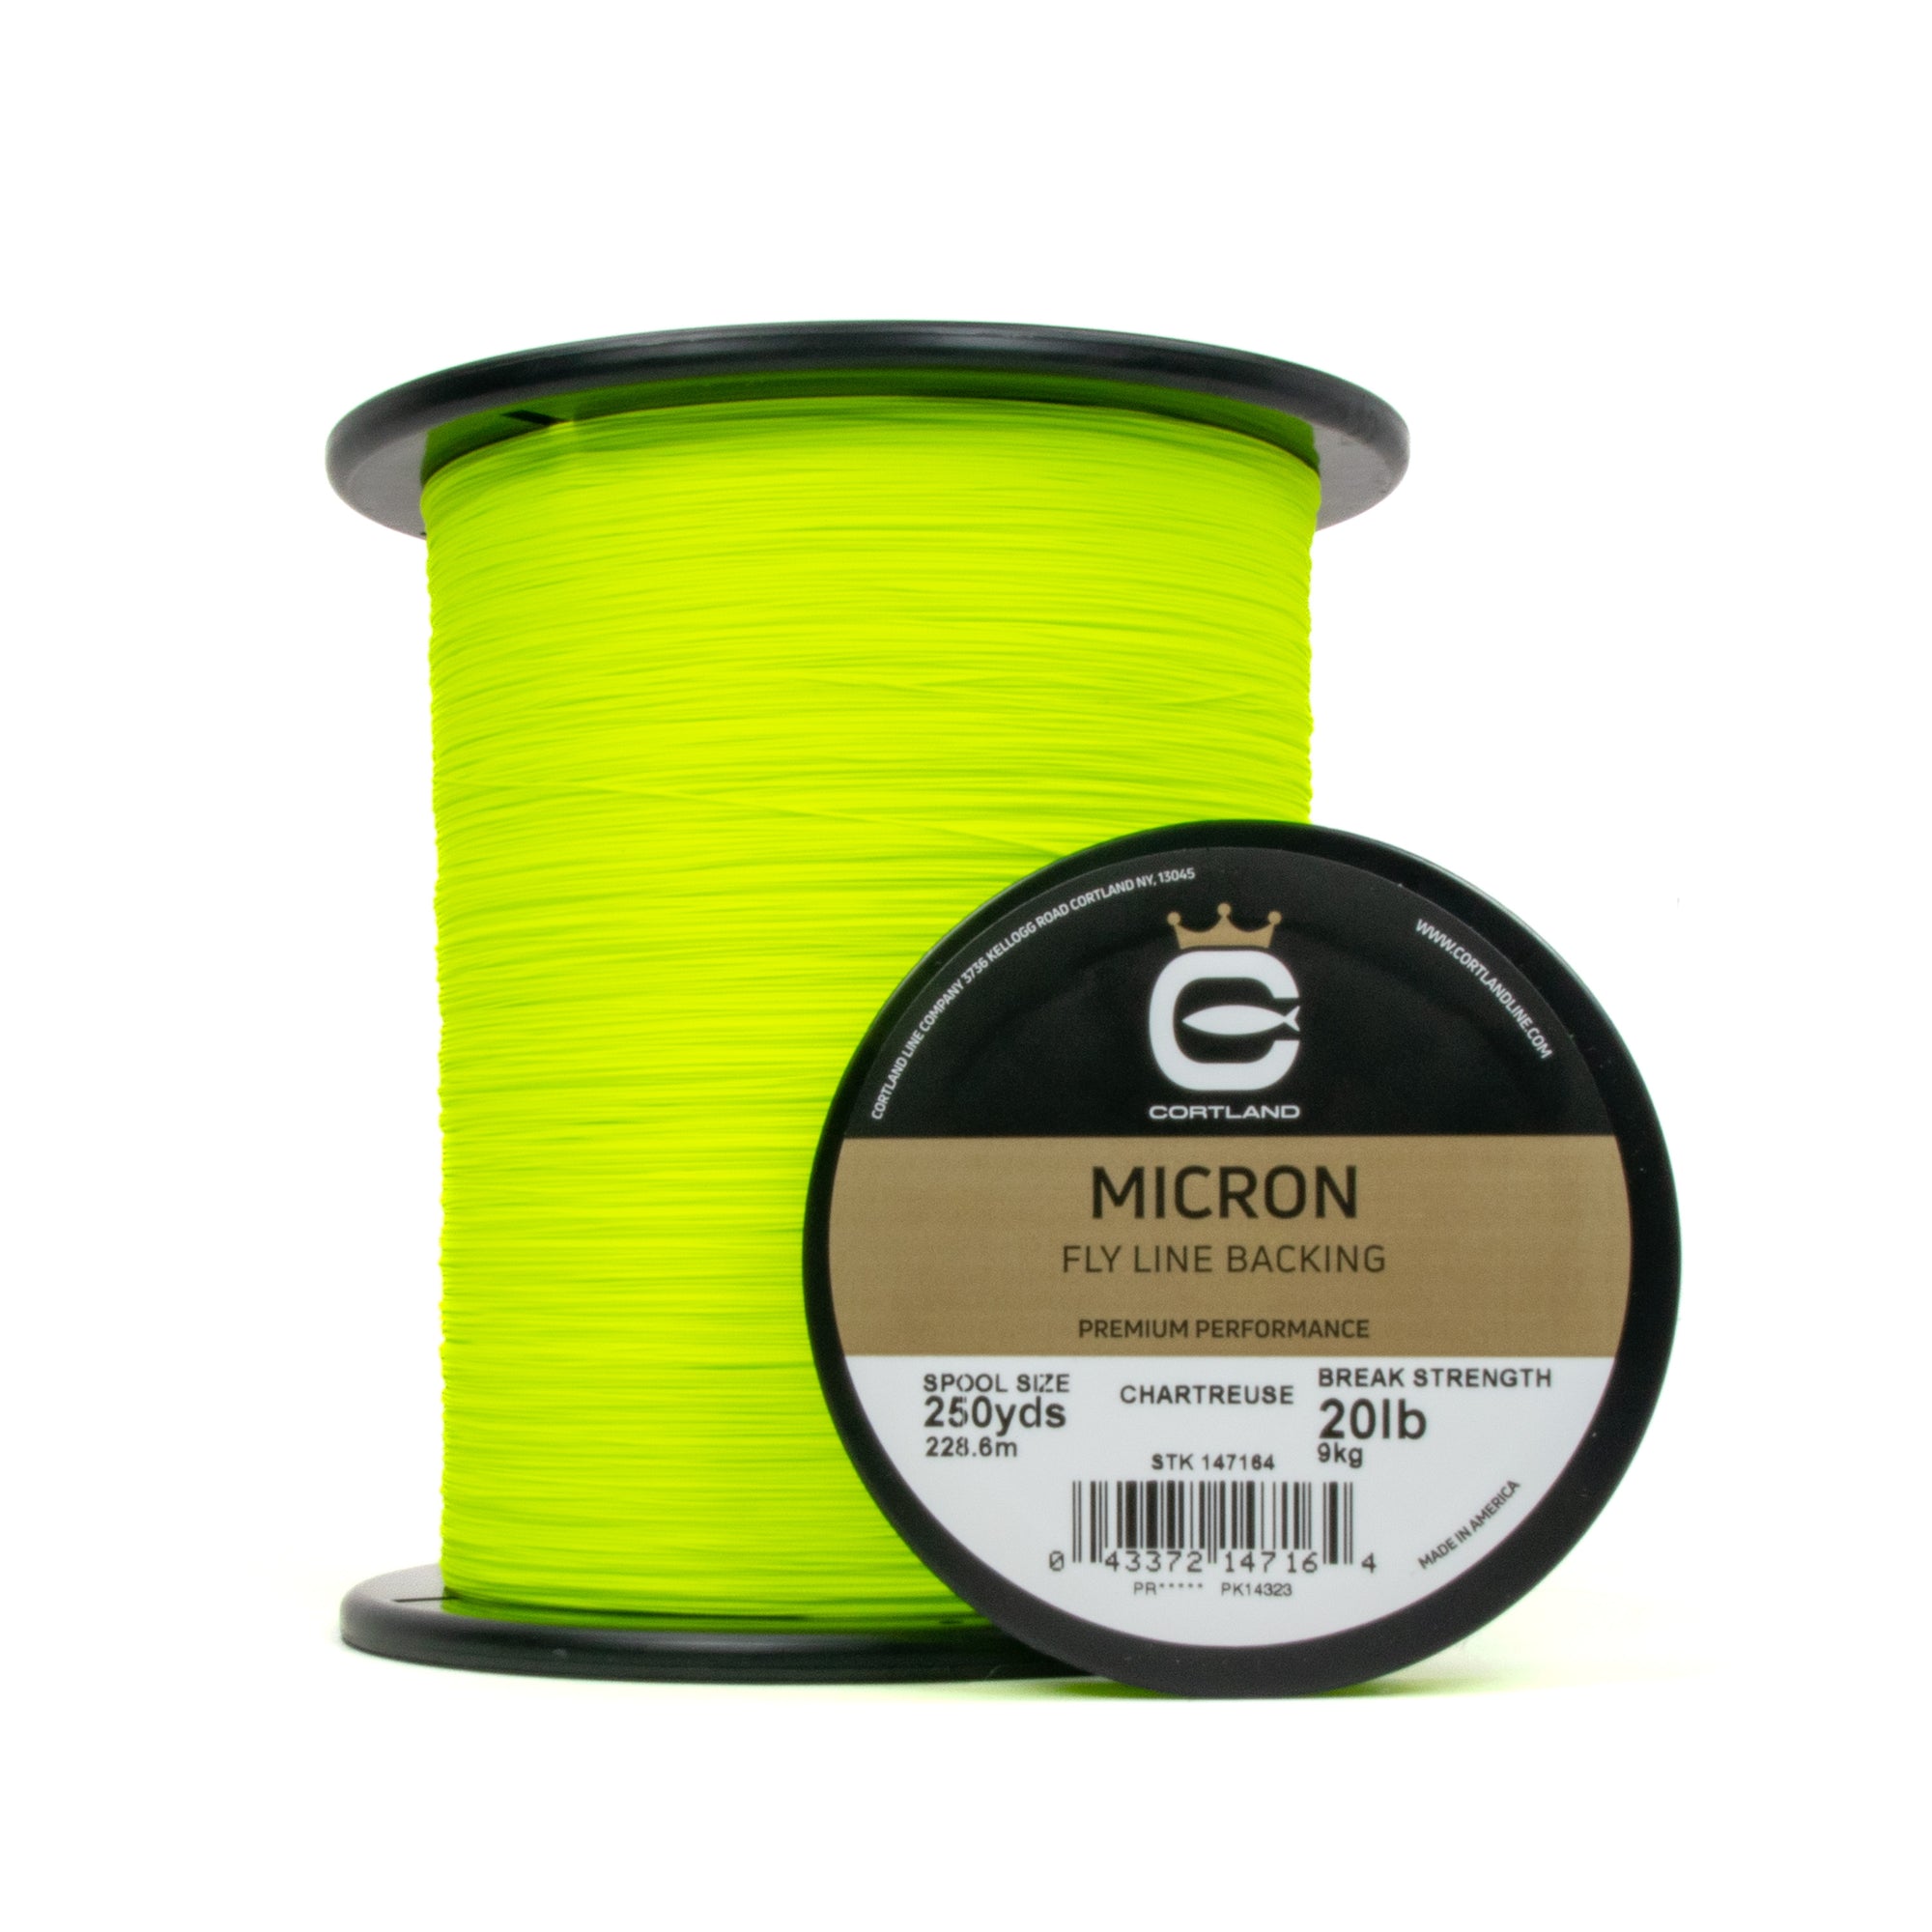 Micron Fly Line Backing - Chartreuse